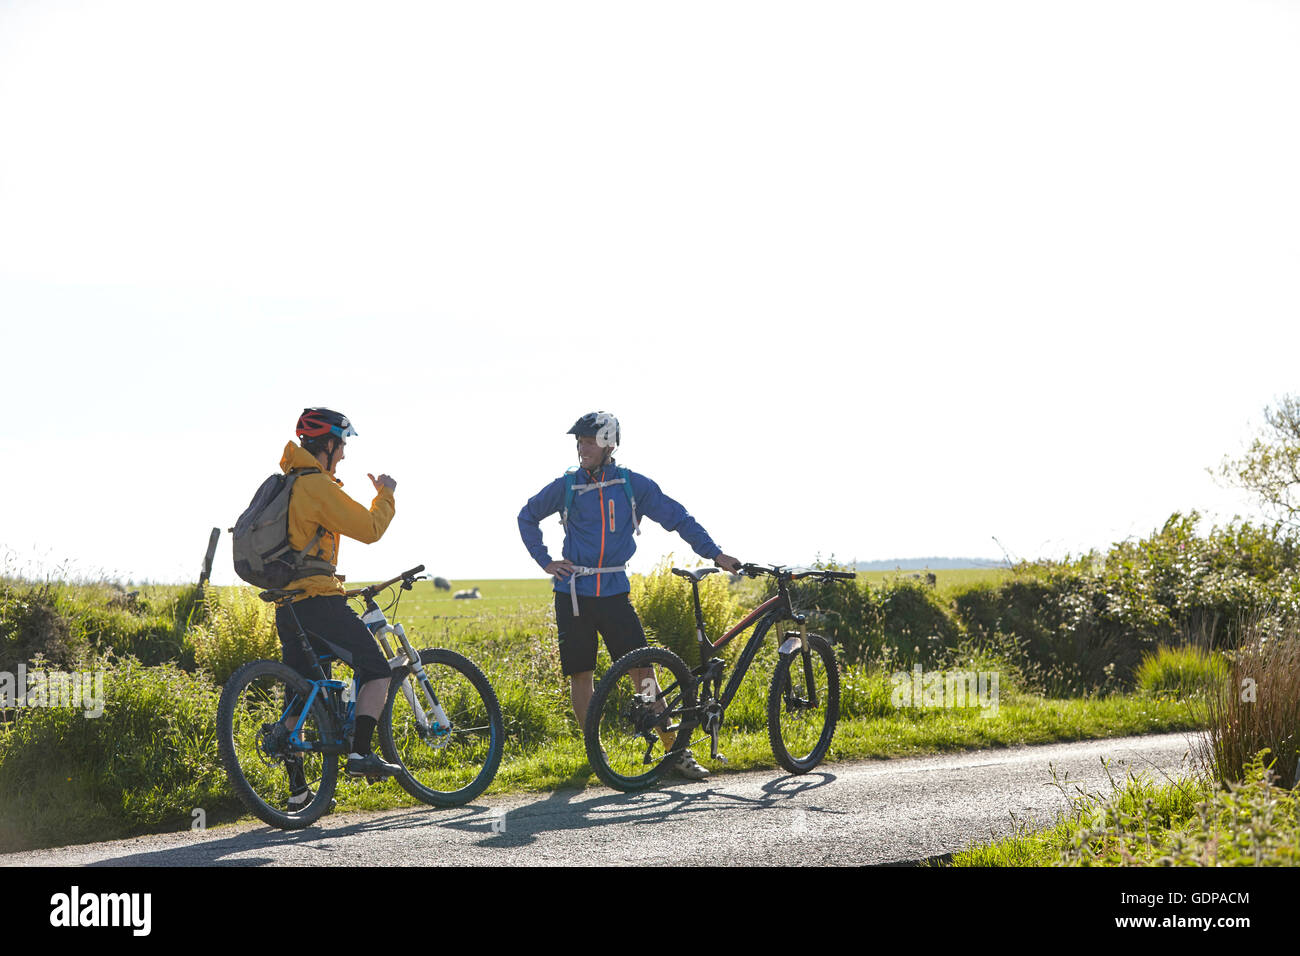 Cyclists holding bicycles on rural road chatting Stock Photo